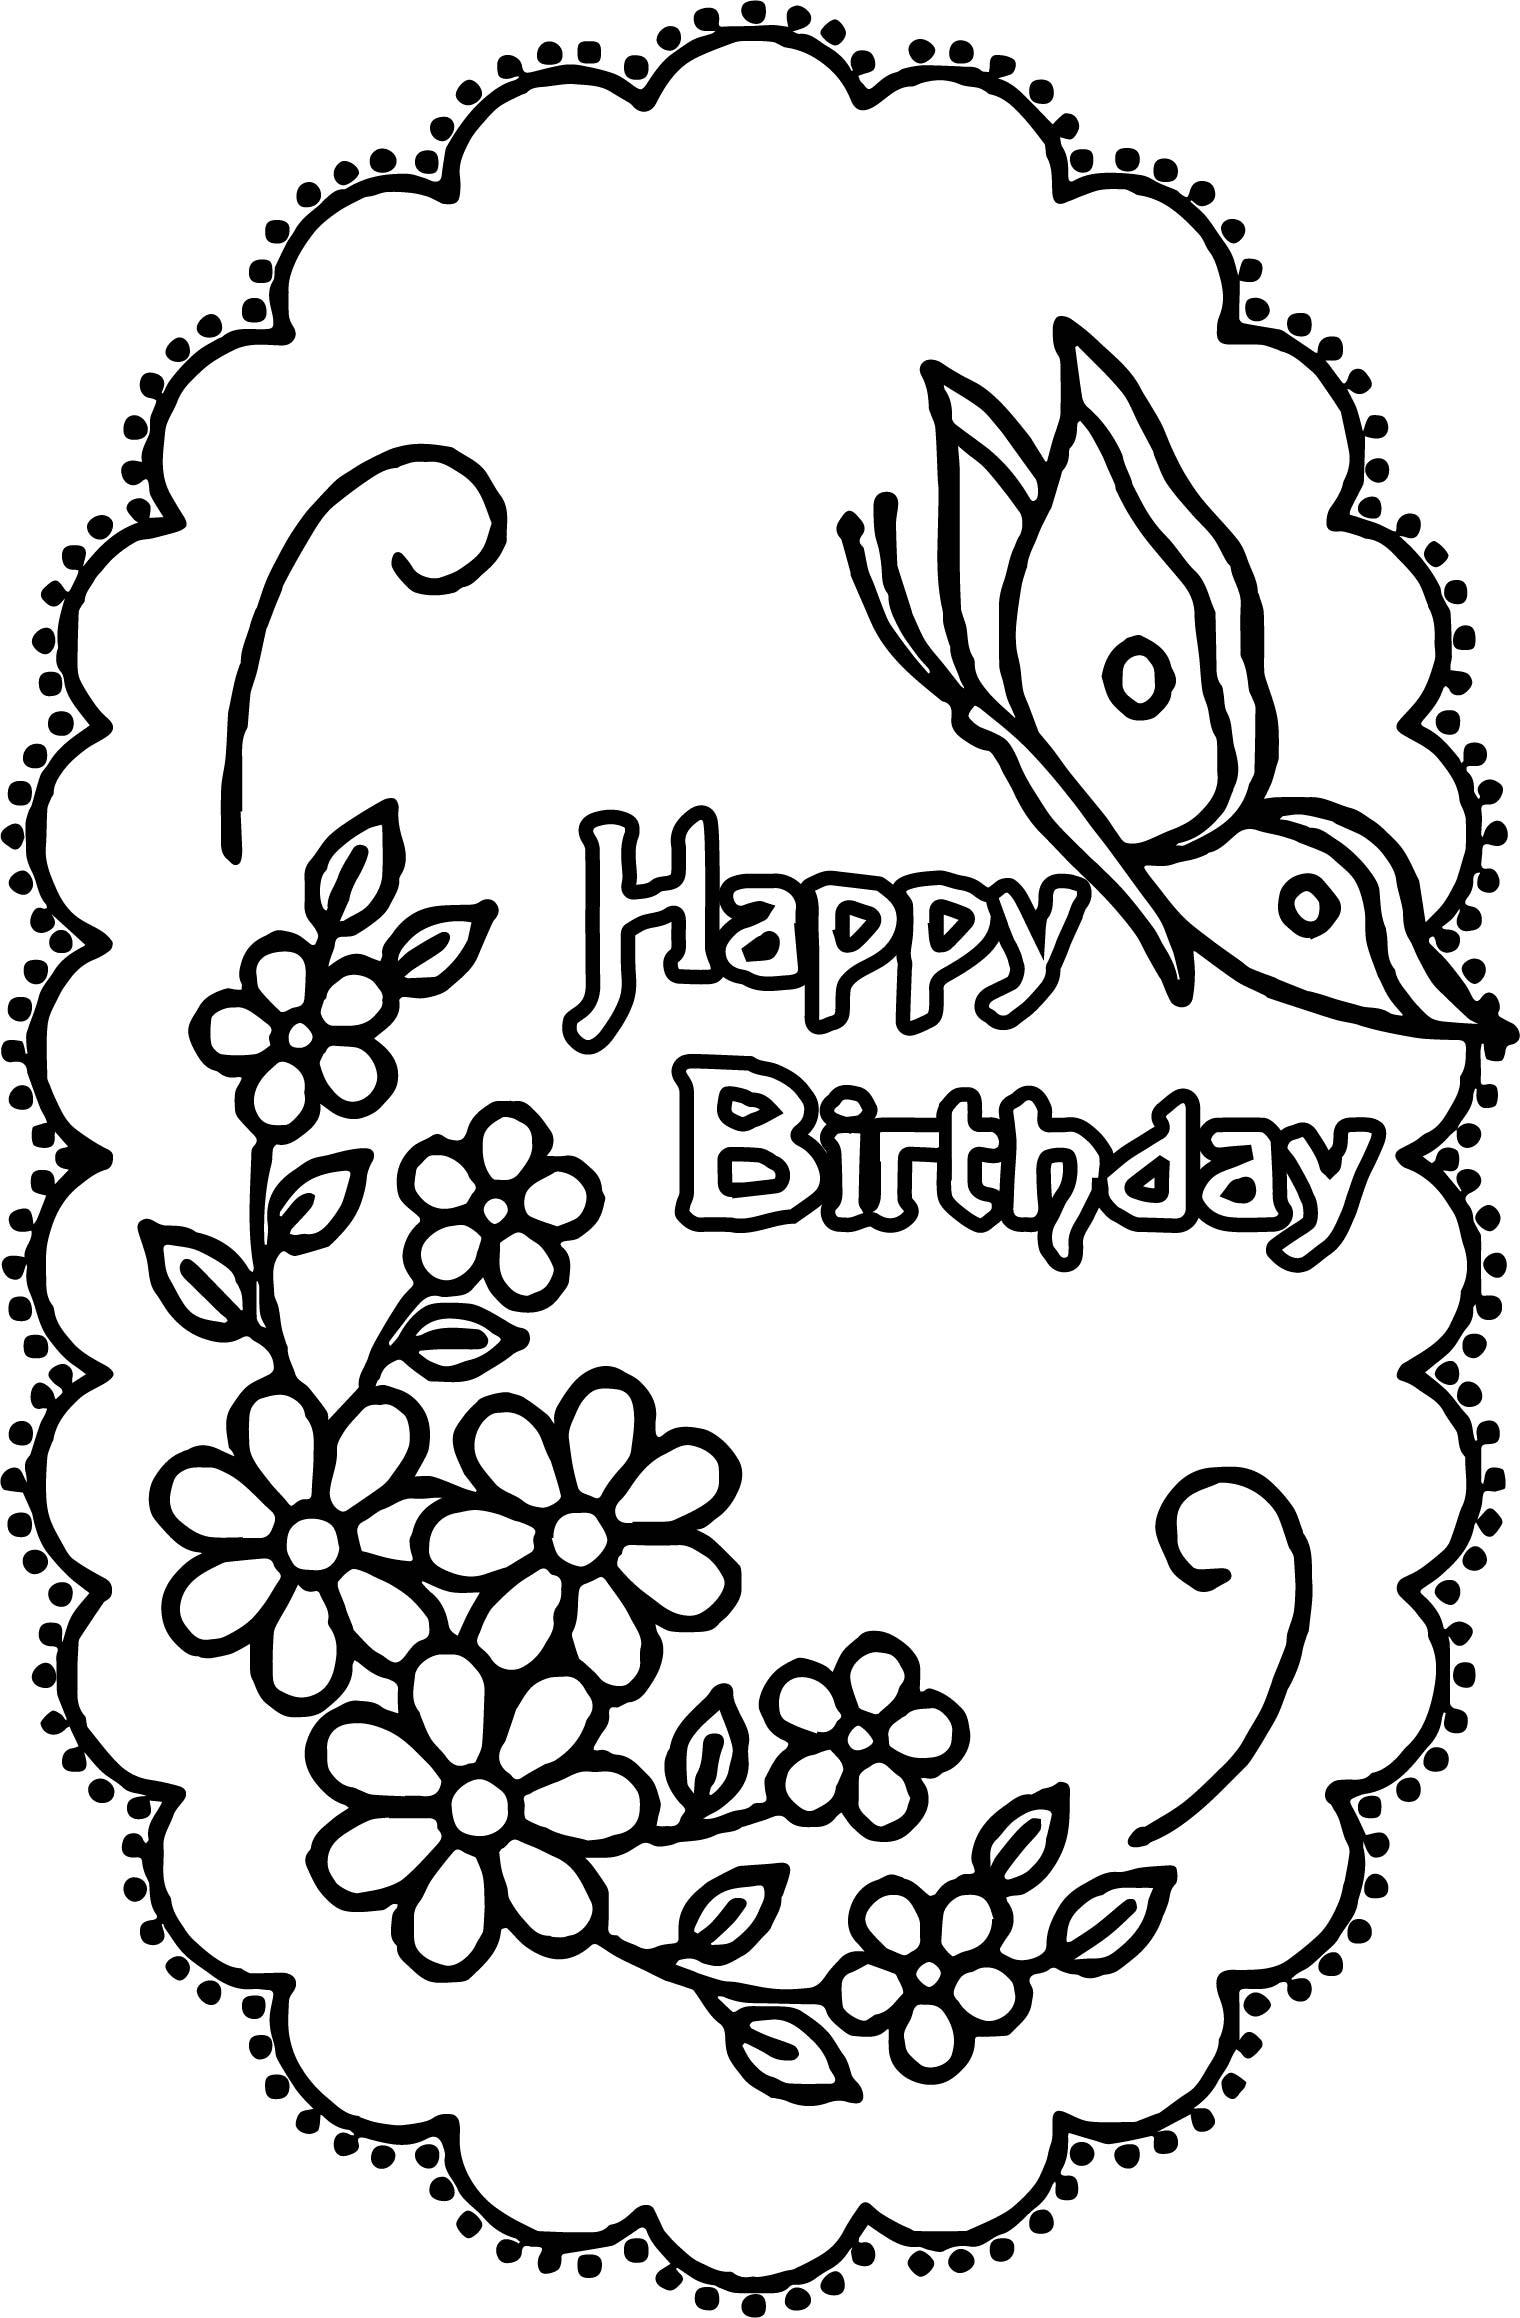 Happy Birthday Adult Coloring Pages at Free